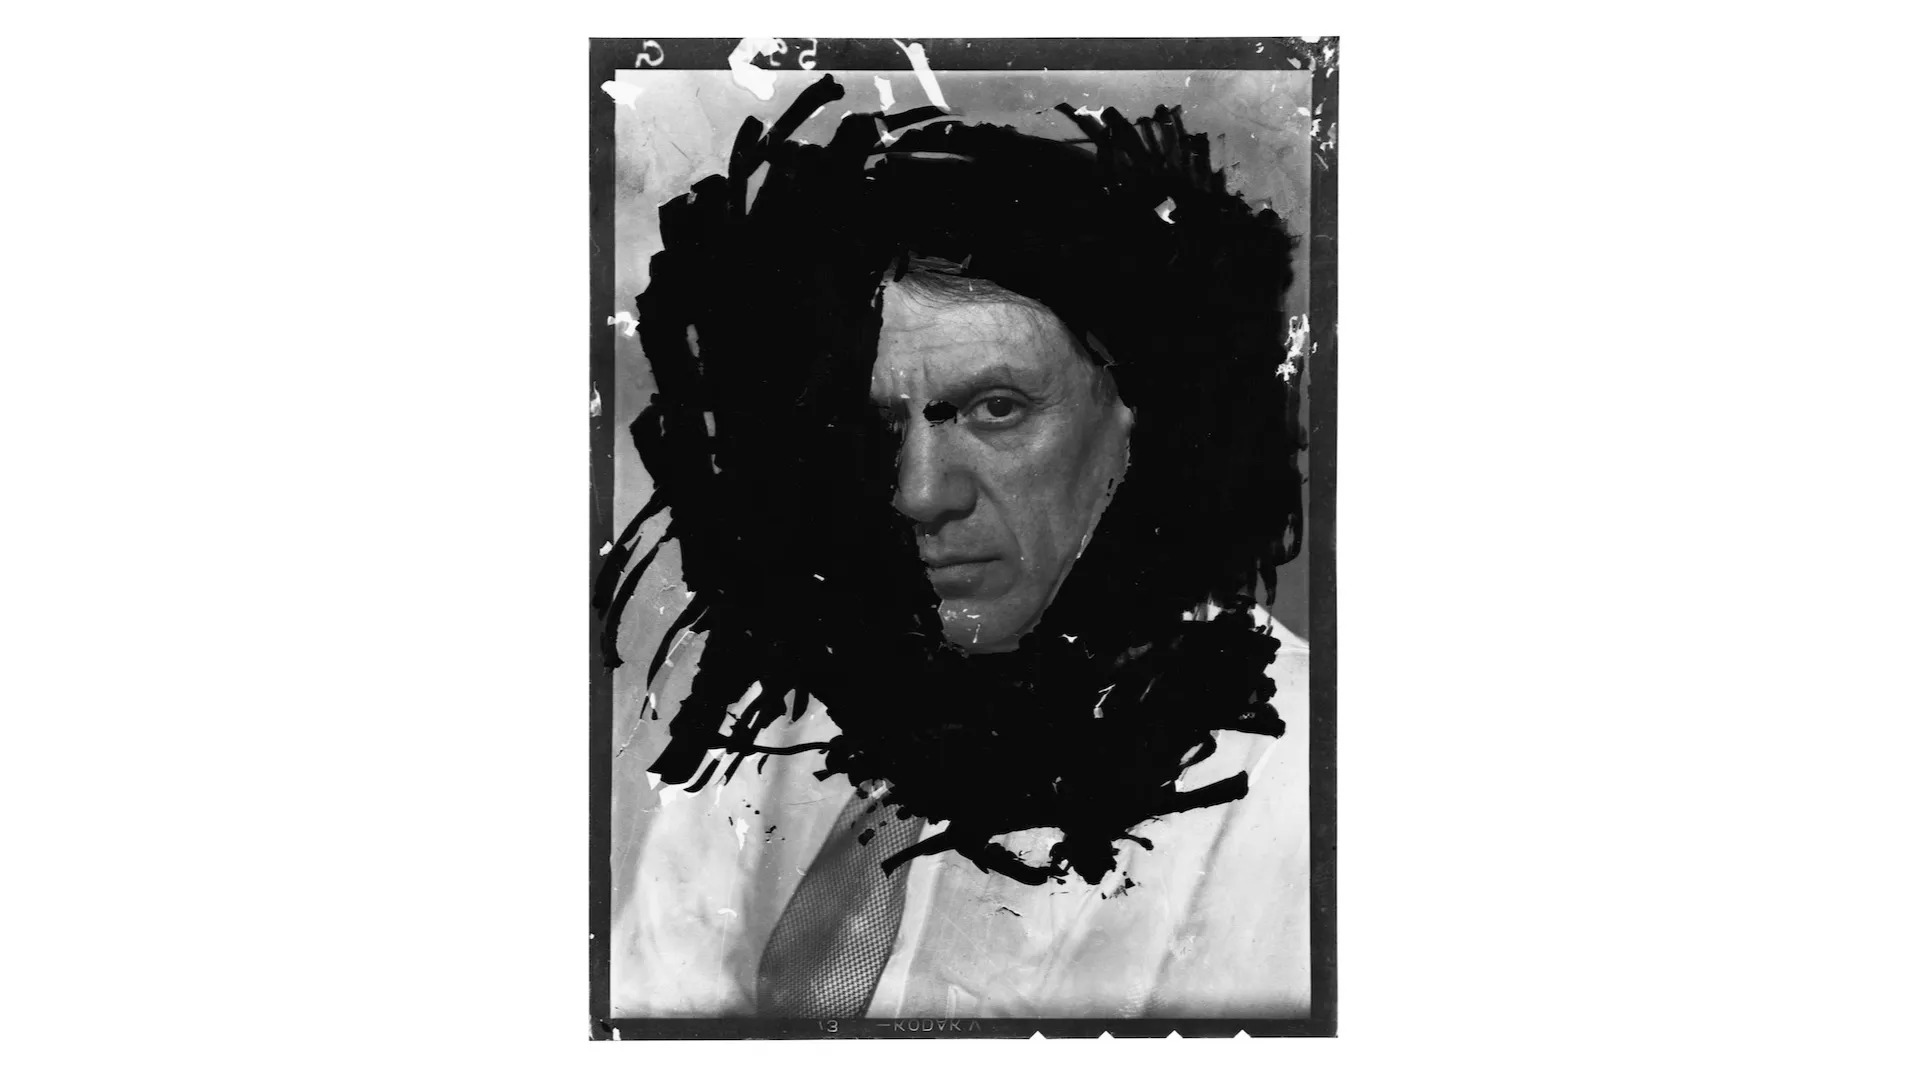 Portrait of Picasso with black marks surrounding his face so only one eye is visible.